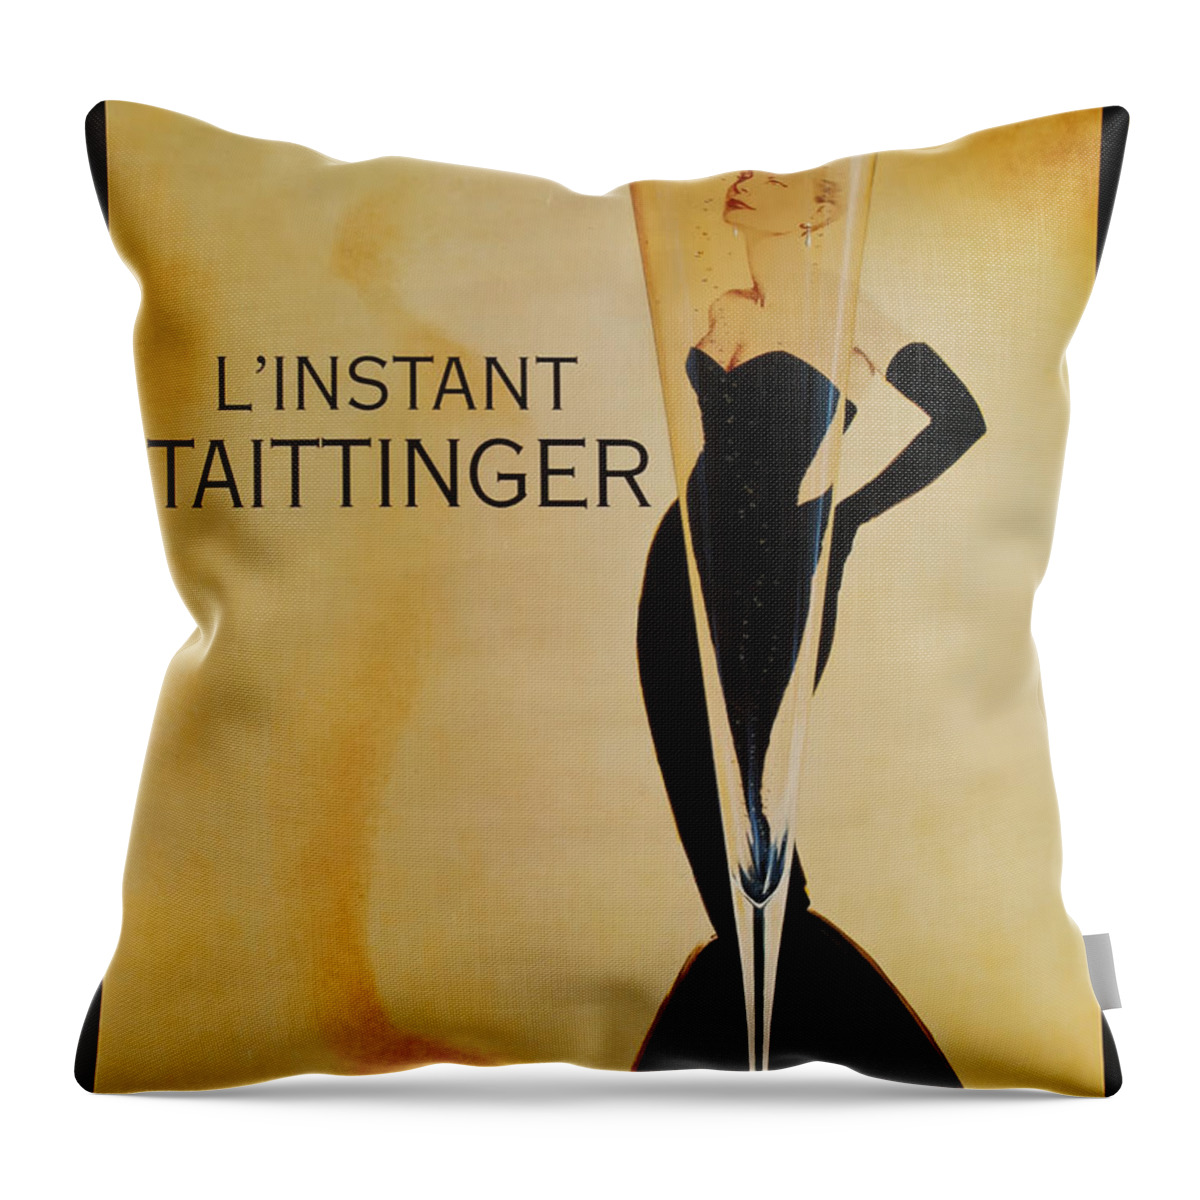 L'instant Taittanger Throw Pillow featuring the digital art L'Instant Taittinger by Georgia Fowler